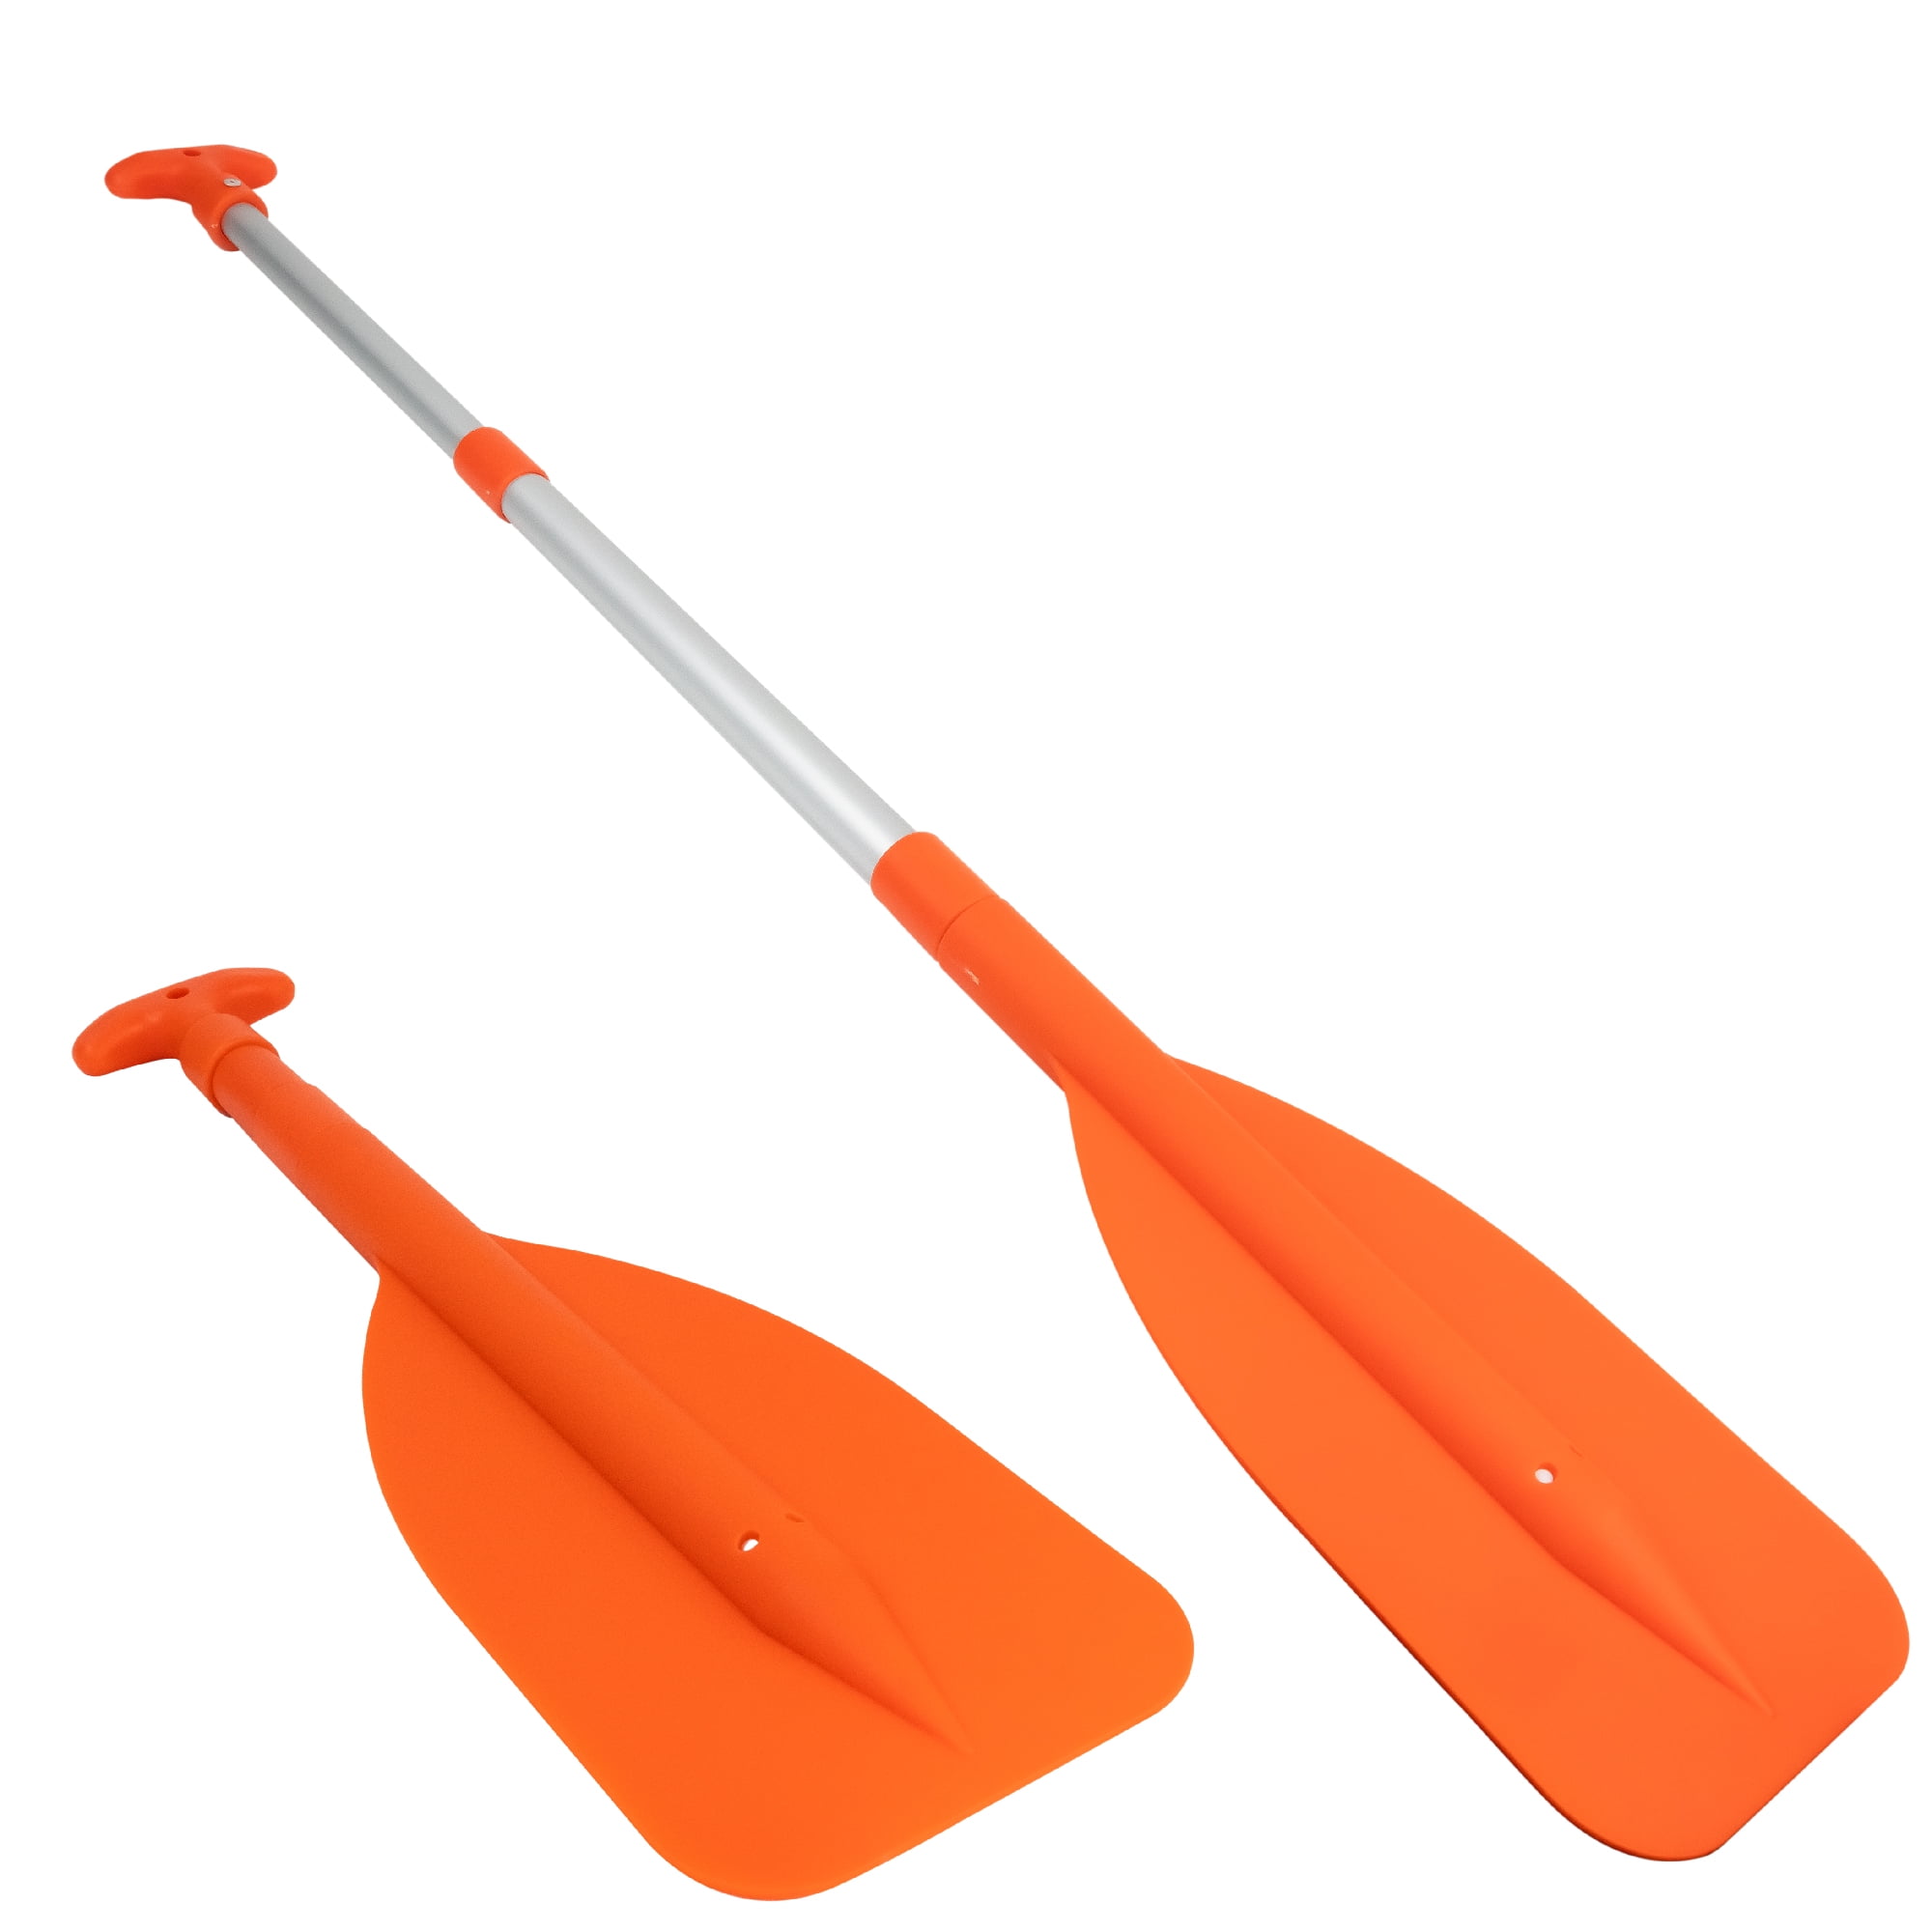  Five Oceans Emergency Telescoping Paddle, Boat Paddles,  Floating Orange Paddle, Extends from 21 to 42, Compact Design for Easy  Storage, Strong Anodized Aluminum Shaft - FO2898 : Sports & Outdoors